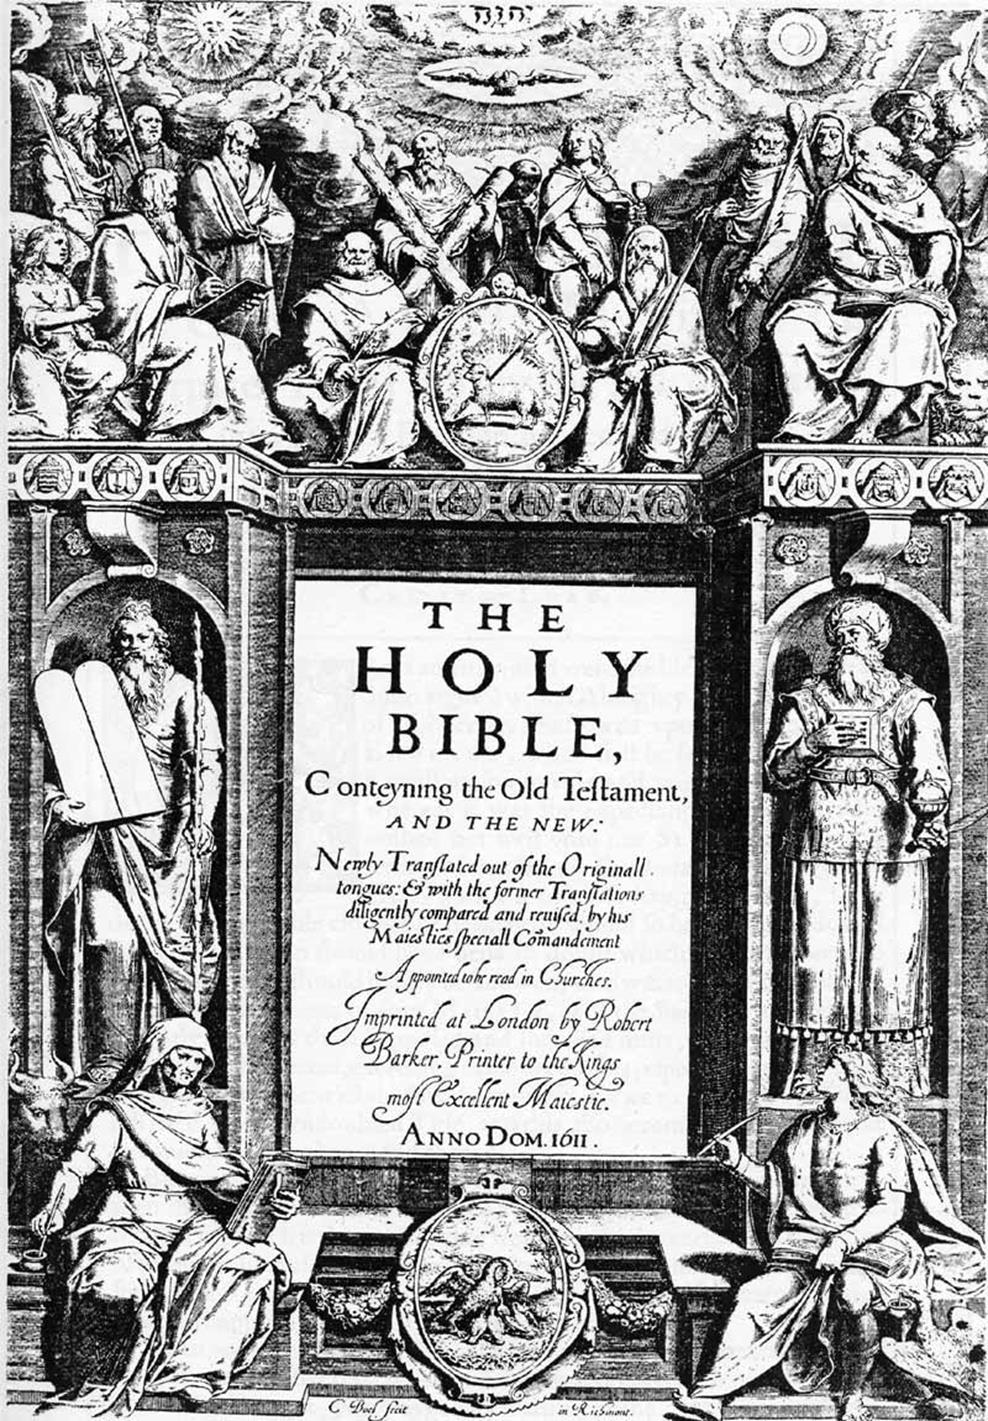 Please look closely at this KJV Title Page. This title page are in a number of places, including some King James only sites, so this page is well known in some Christian circles.